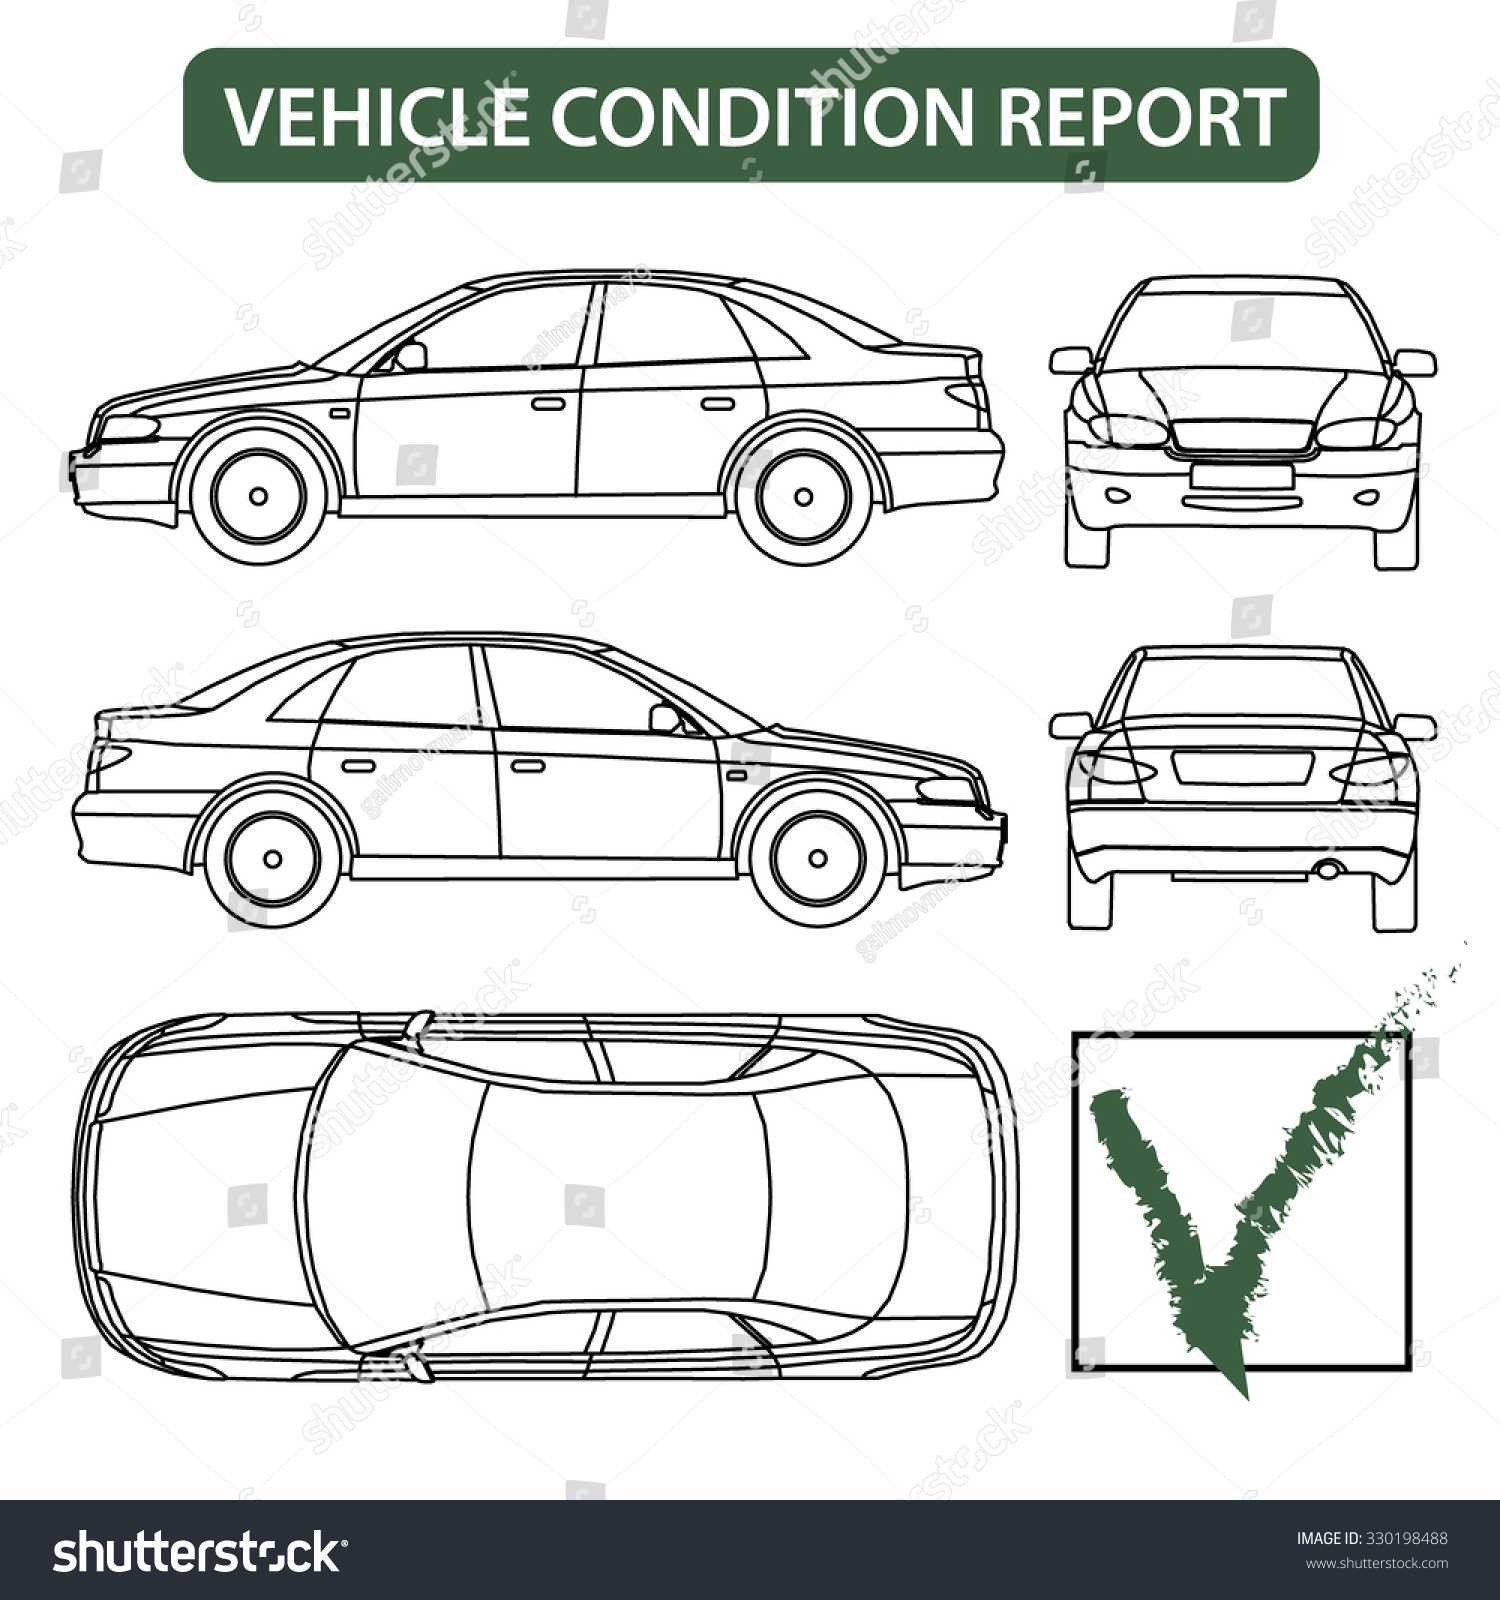 Vehicle Condition Report Images, Stock Photos & Vectors For Truck Condition Report Template